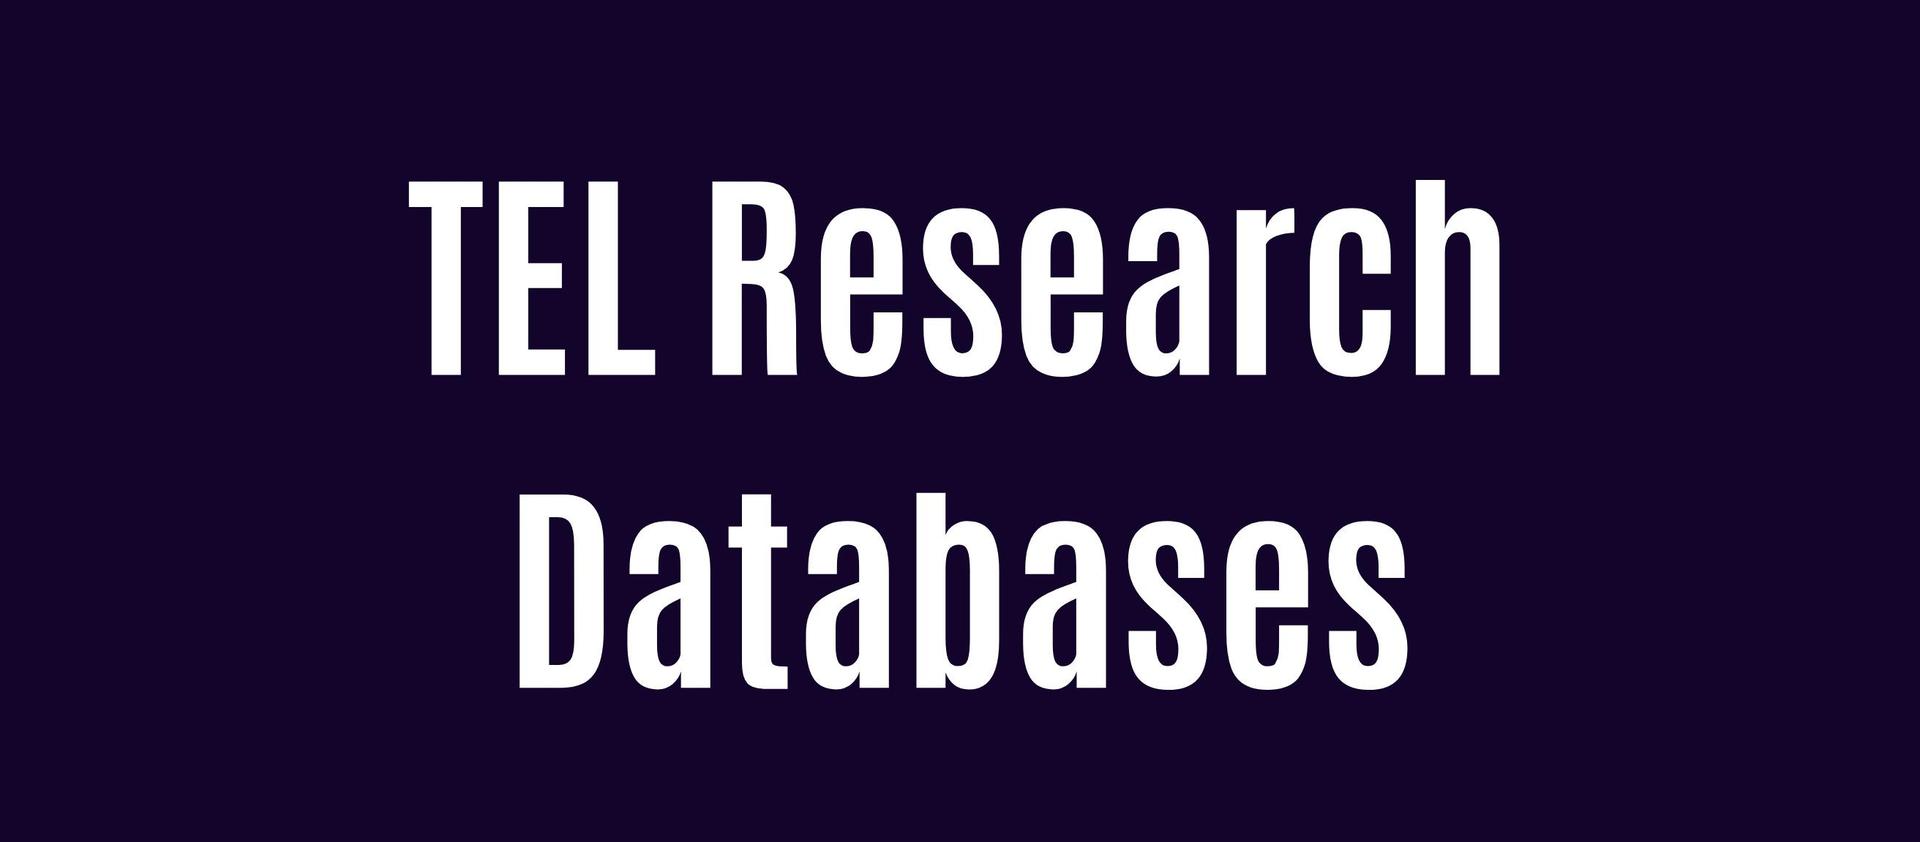 TEL Research Databases